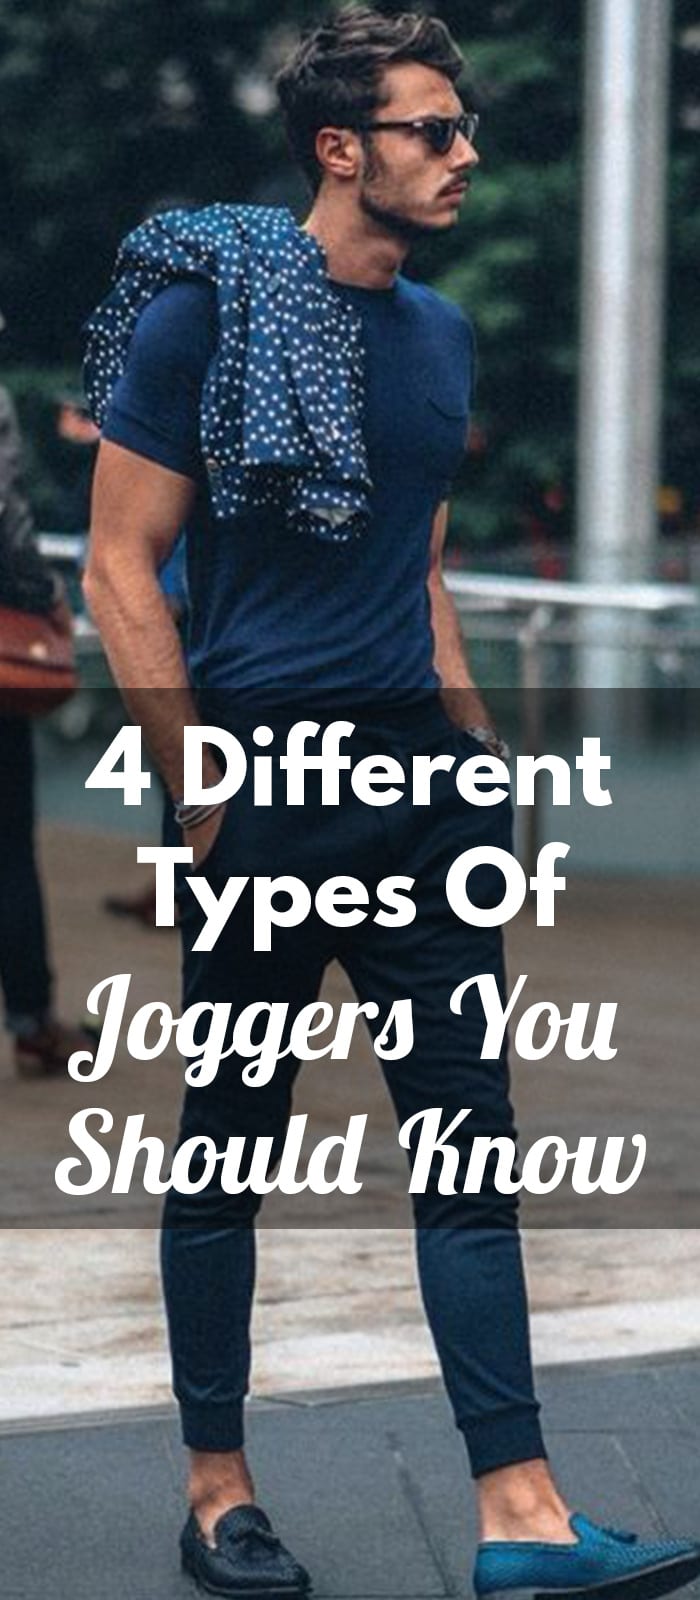 4 Different Types Of Joggers You Should Know